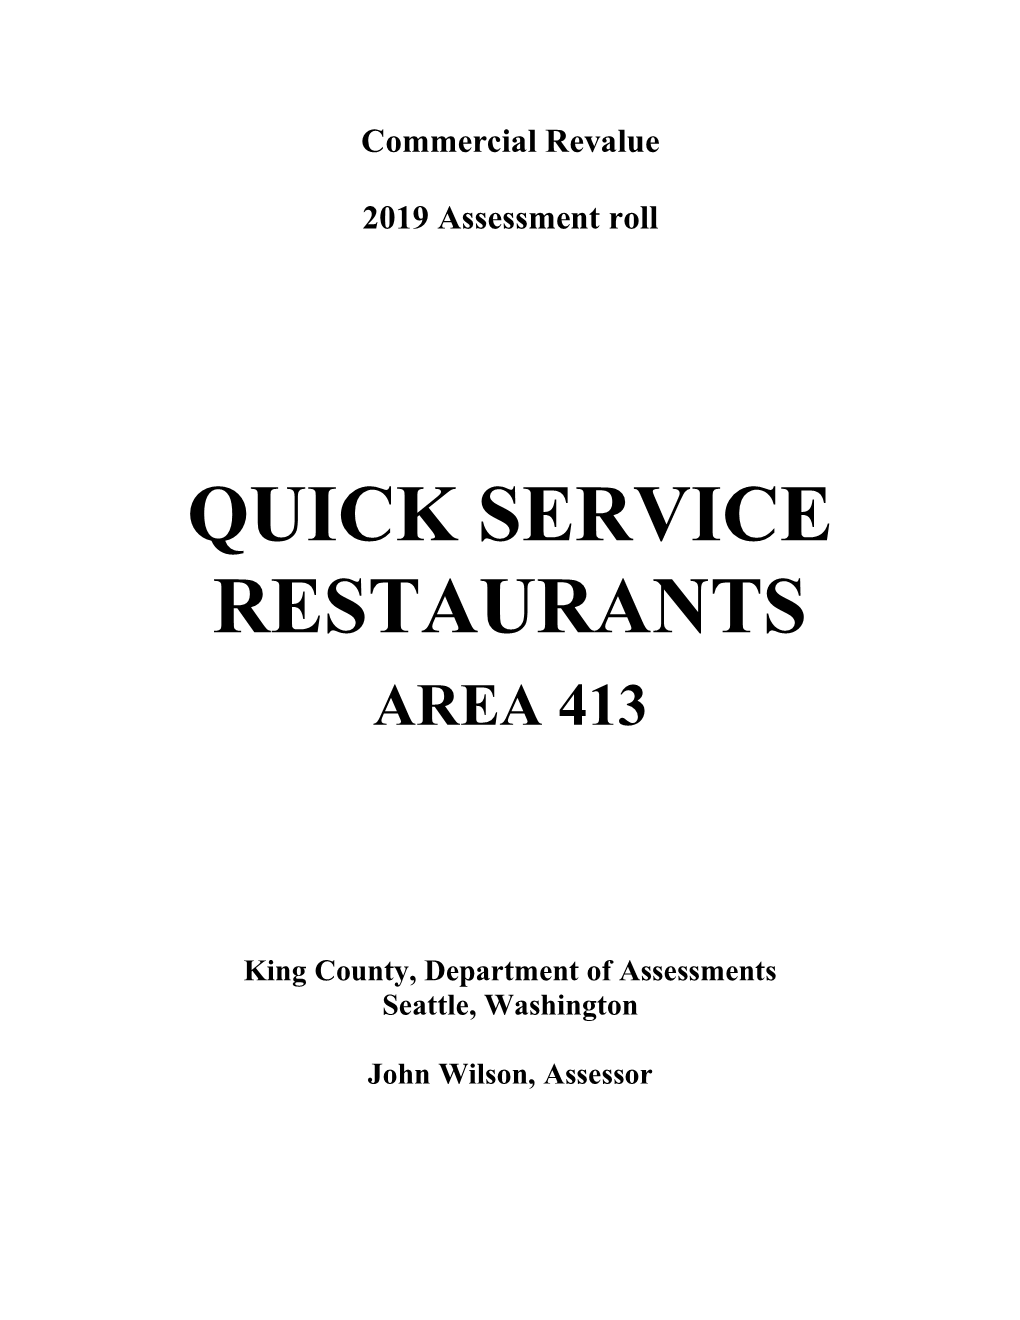 Quick Service Restaurants in the Different Submarkets